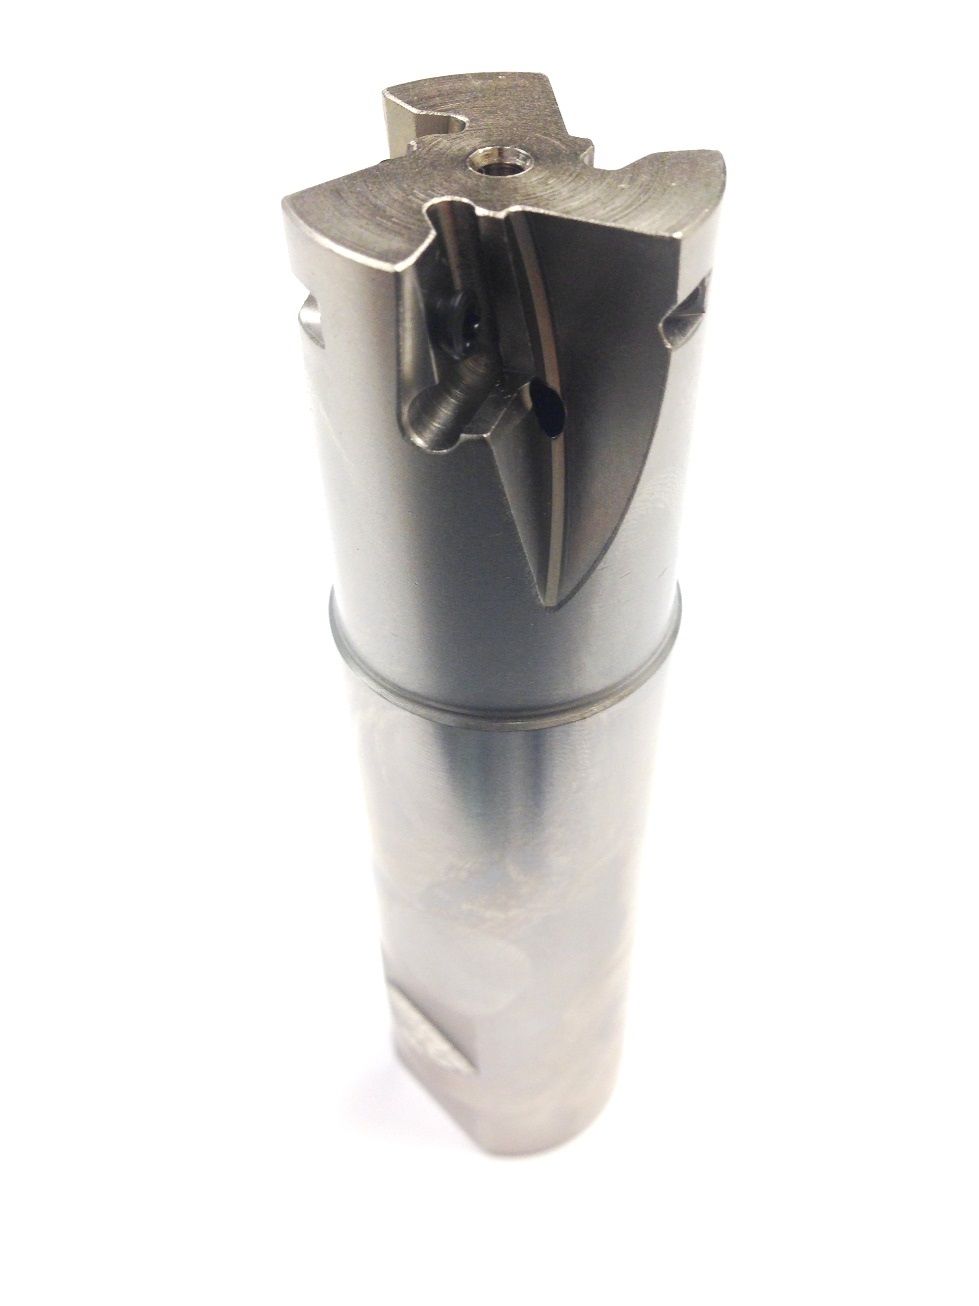 1-1/4 X 1-1/4" SHANK INDEXABLE COOLANT-THRU END MILL (5822-8250)